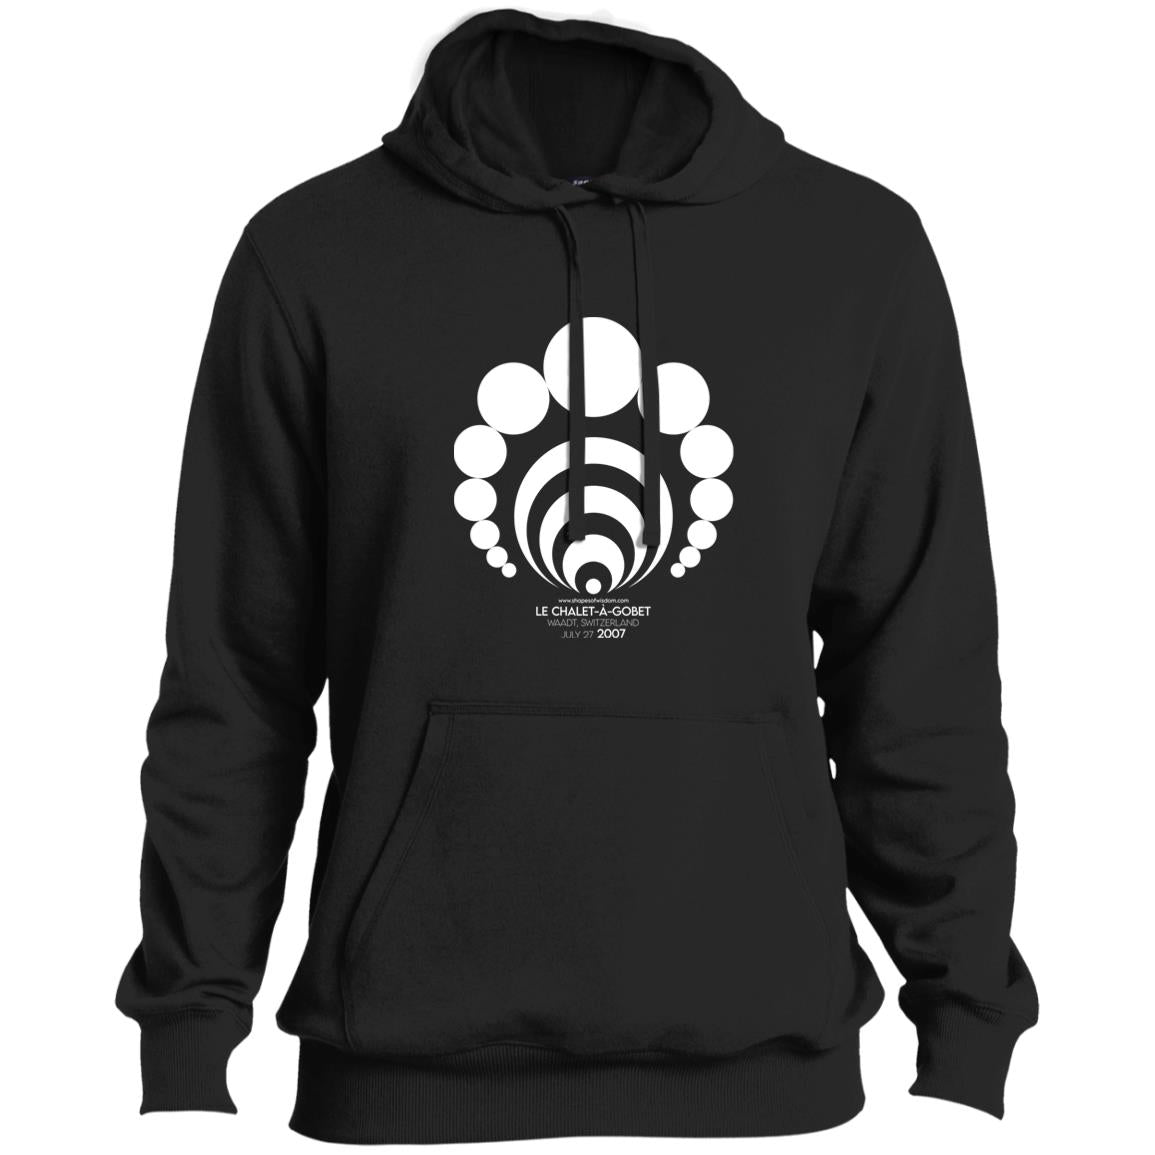 Crop Circle Pullover Hoodie - Le Chalet-a-Gobet